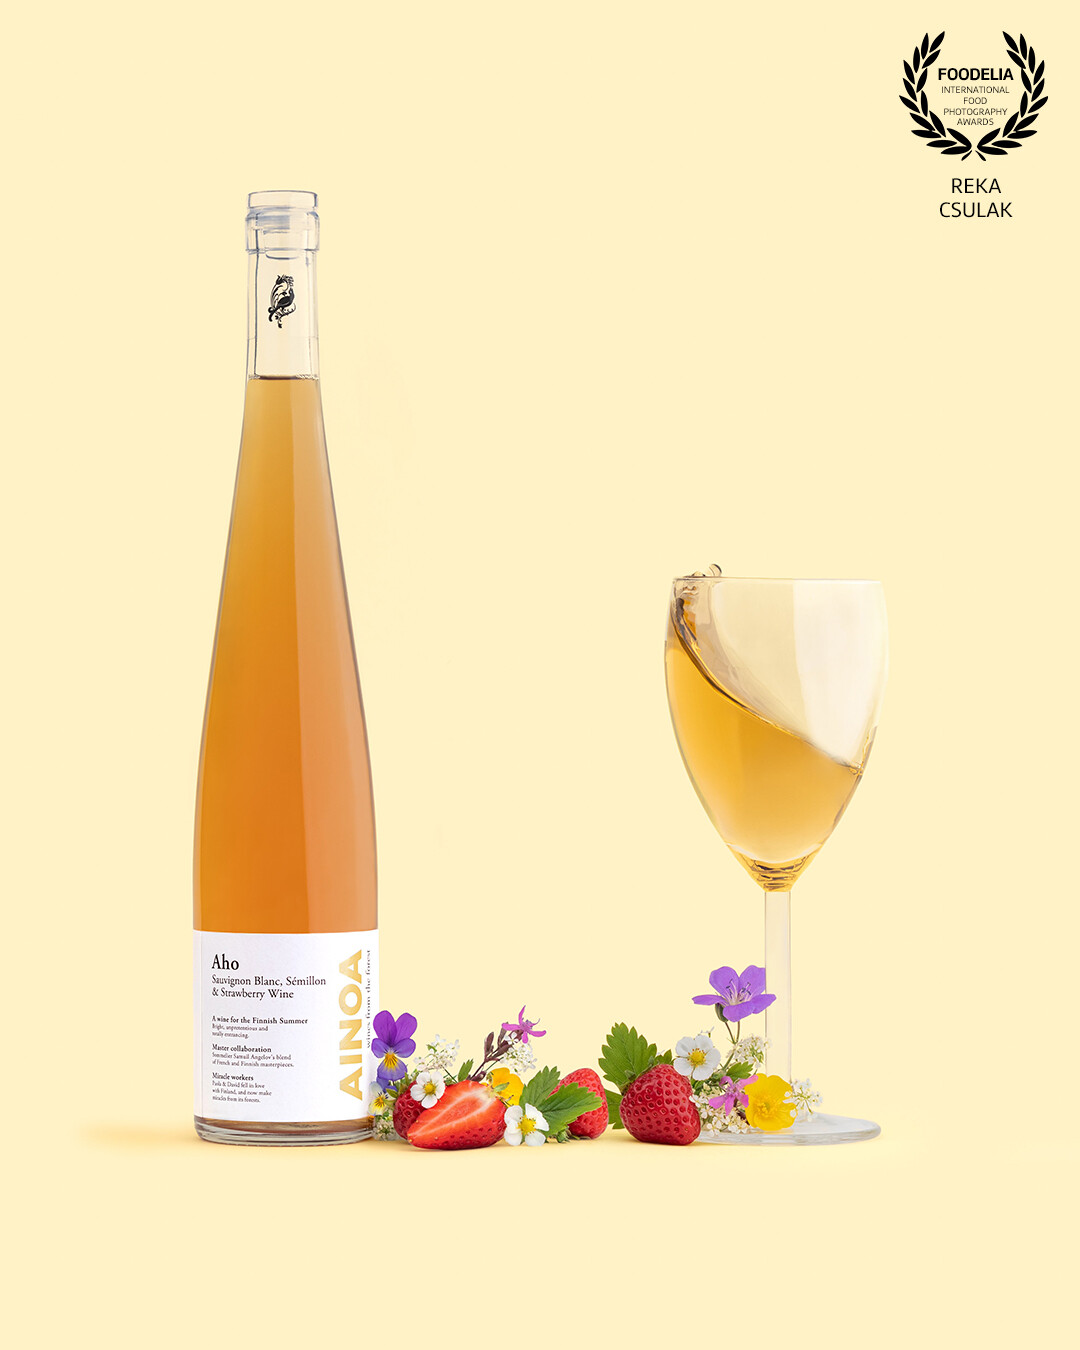 🌼 Ainoa Winery's Aho - the name literally means meadow, so I wanted to bring typical Finnish wildflowers to the scene.<br />
<br />
🥂 It is “A wine for the Finnish Summer” - as written on the label, so I set the colour palette to bring the summer vibes, and warm sunlight + incorporated a playful frozen action dedicated to every summer moment with a glass of wine.<br />
<br />
🍓 Strawberries are not only the essential element of Finnish summer but also strawberry wine is one of the main components of Aho, hence beautiful local strawberries also appear on the scene.